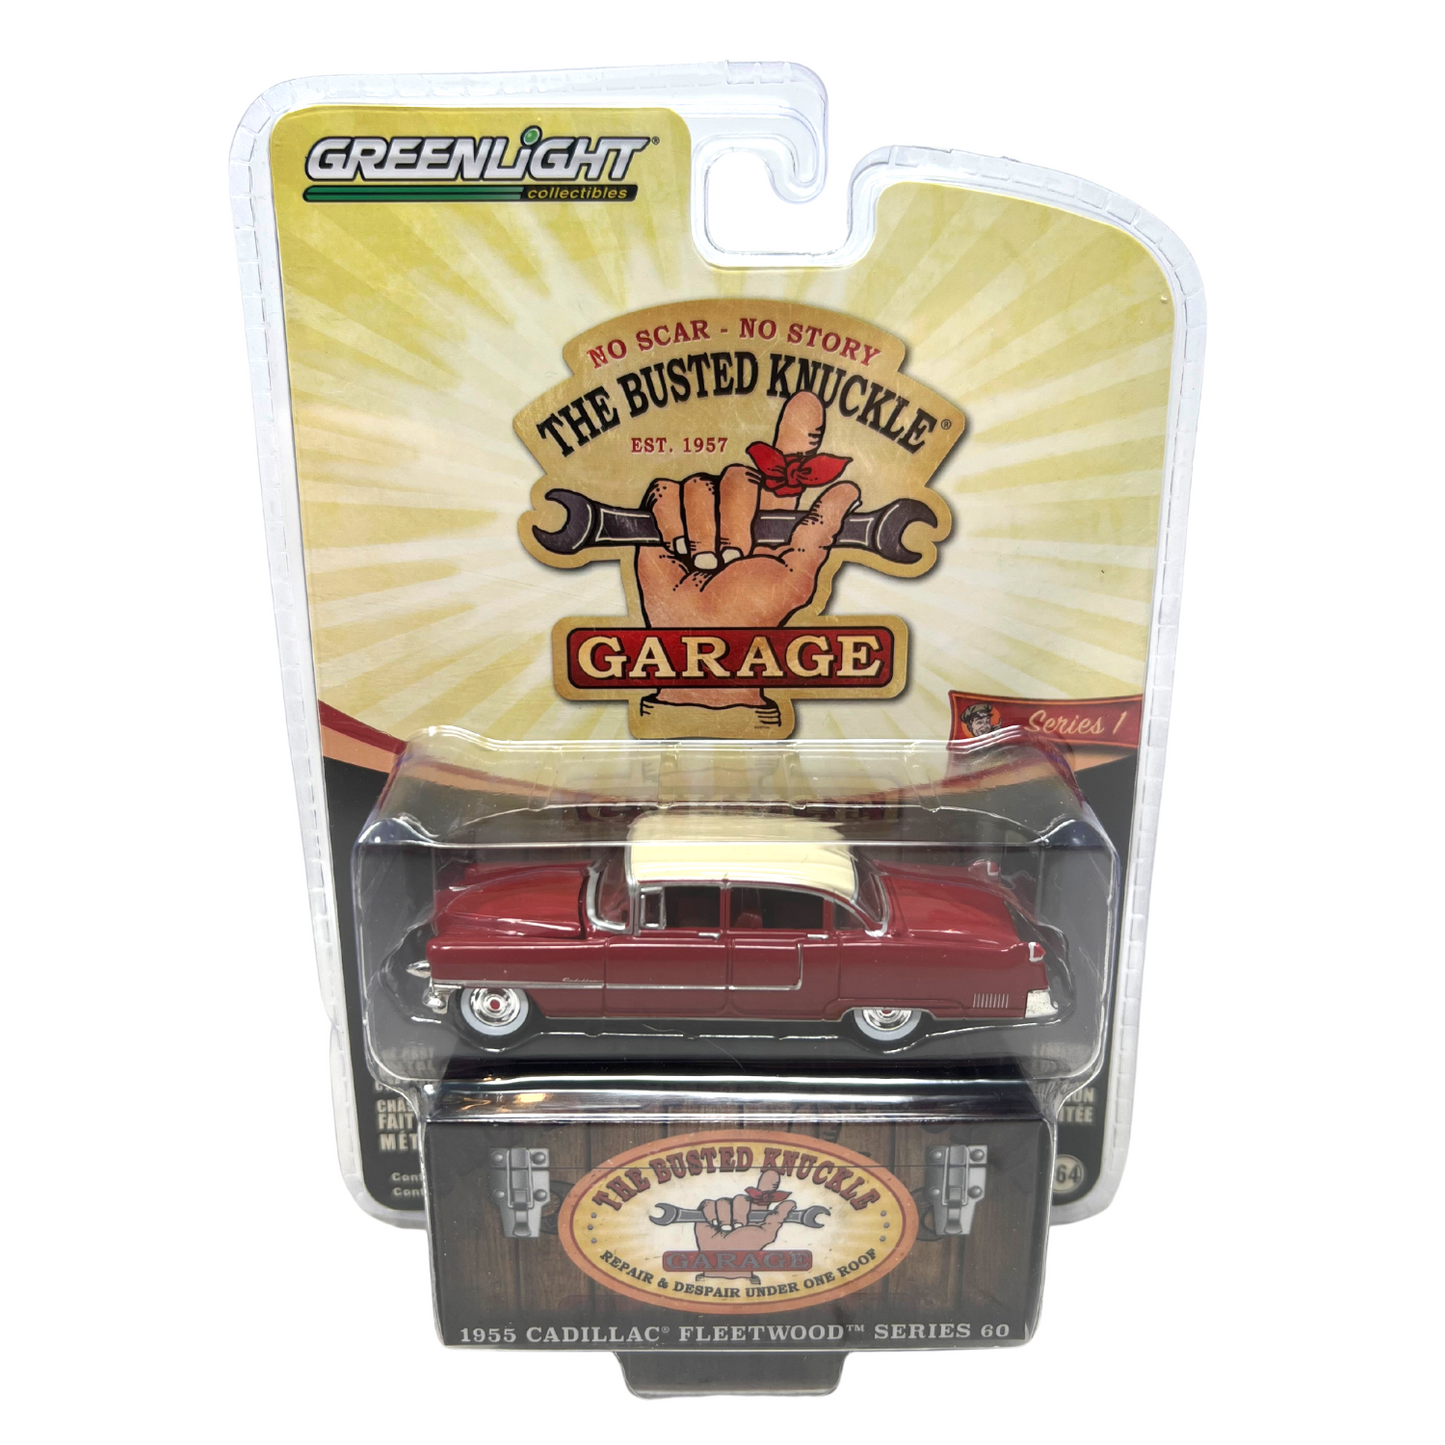 Greenlight The Busted Knuckle Garage 1955 Cadillac Fleetwood 1:64 Diecast